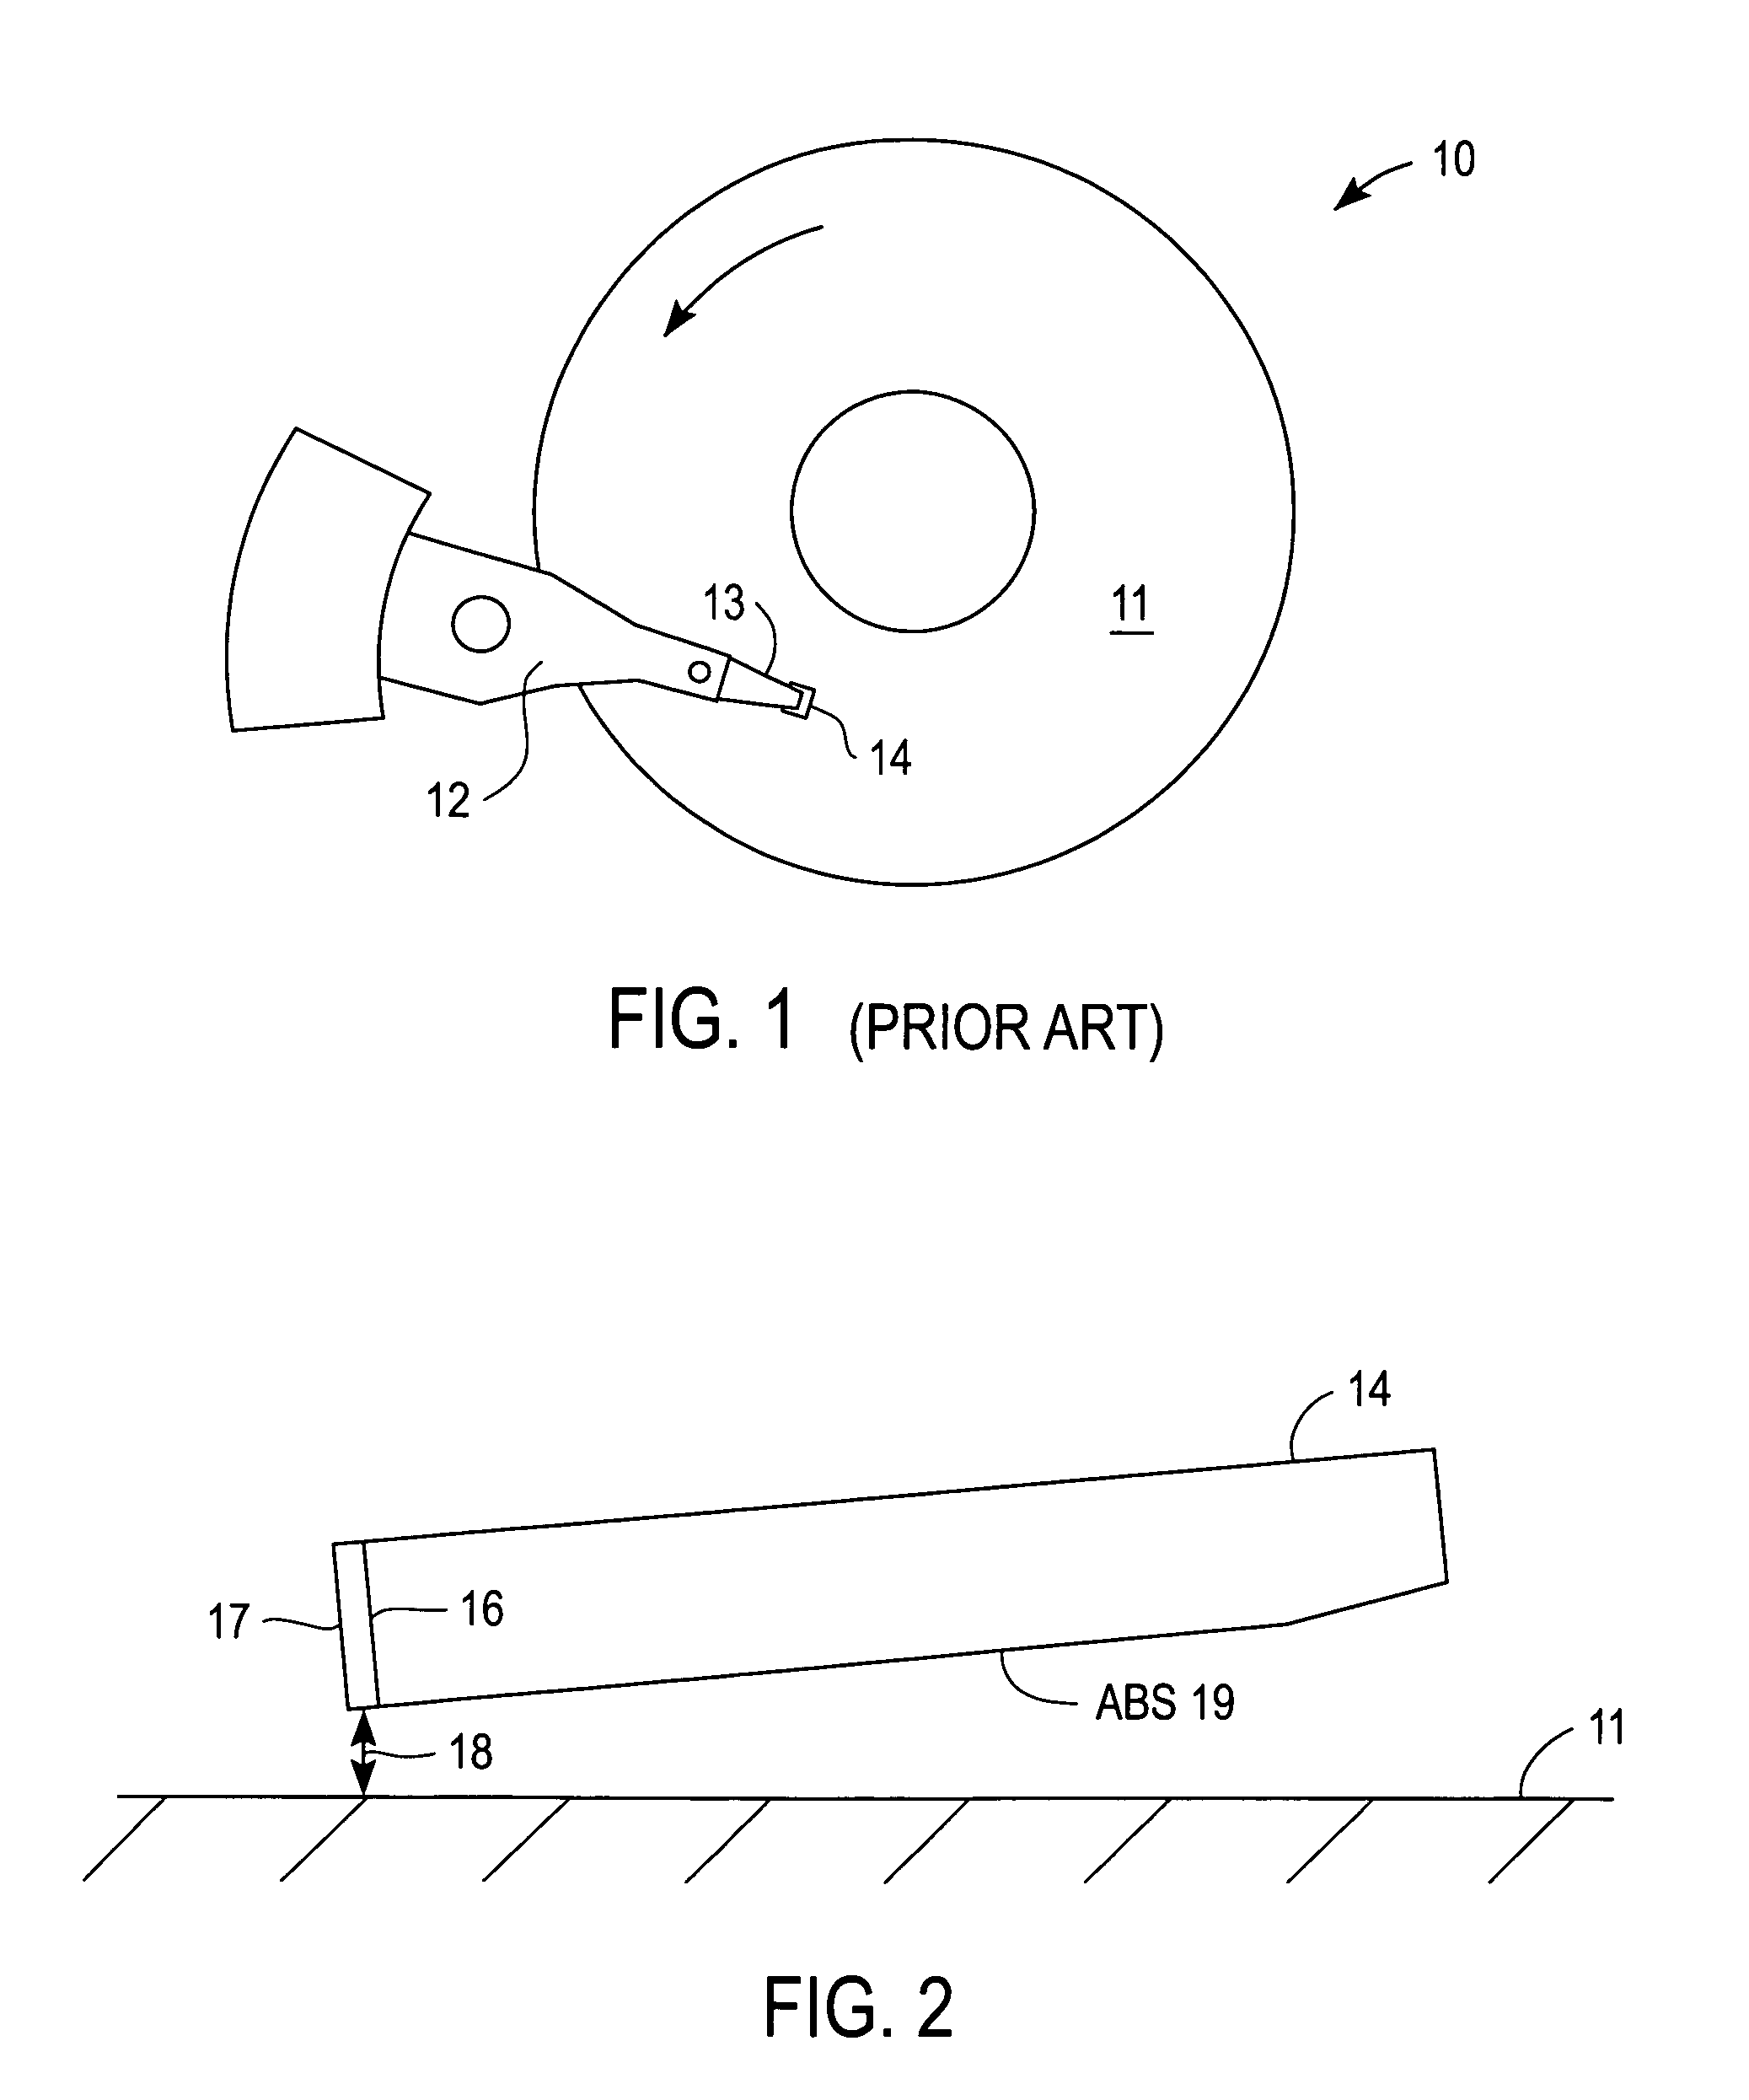 Magnetic recording head with resistive heating element and thermal barrier layer